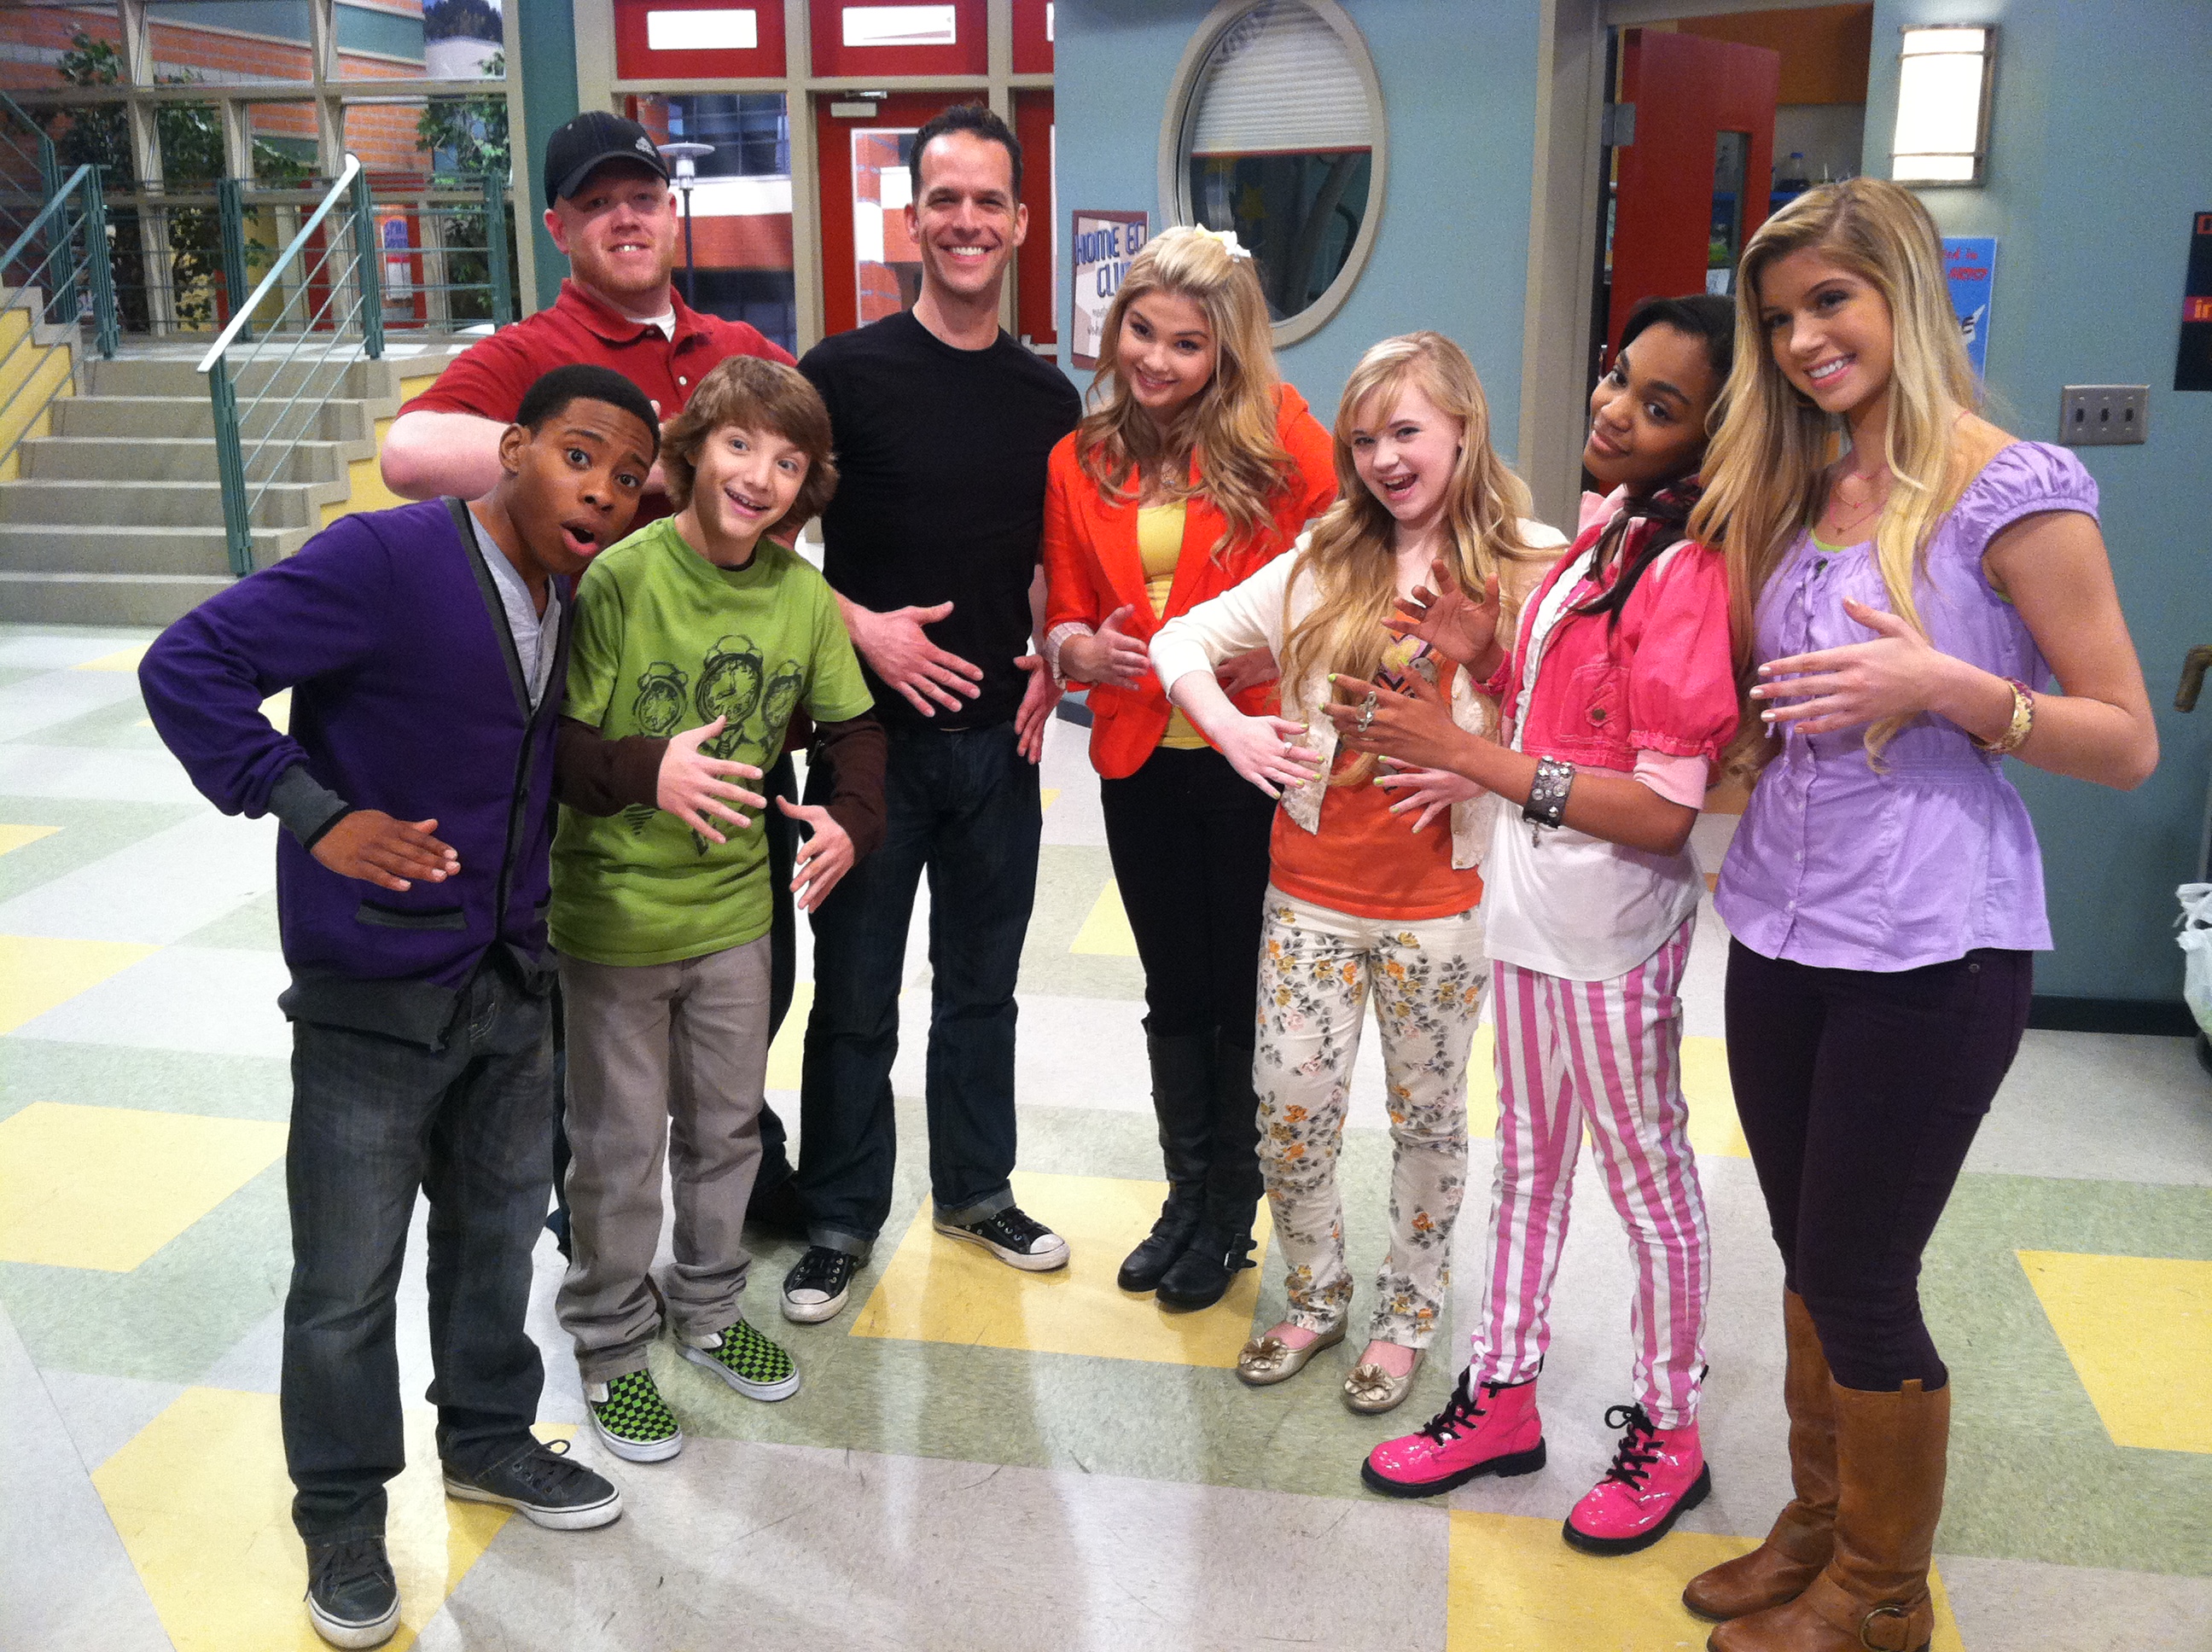 Chris F. Bartlett and the cast of A.N.T. Farm for the ScavANTger Hunt episode